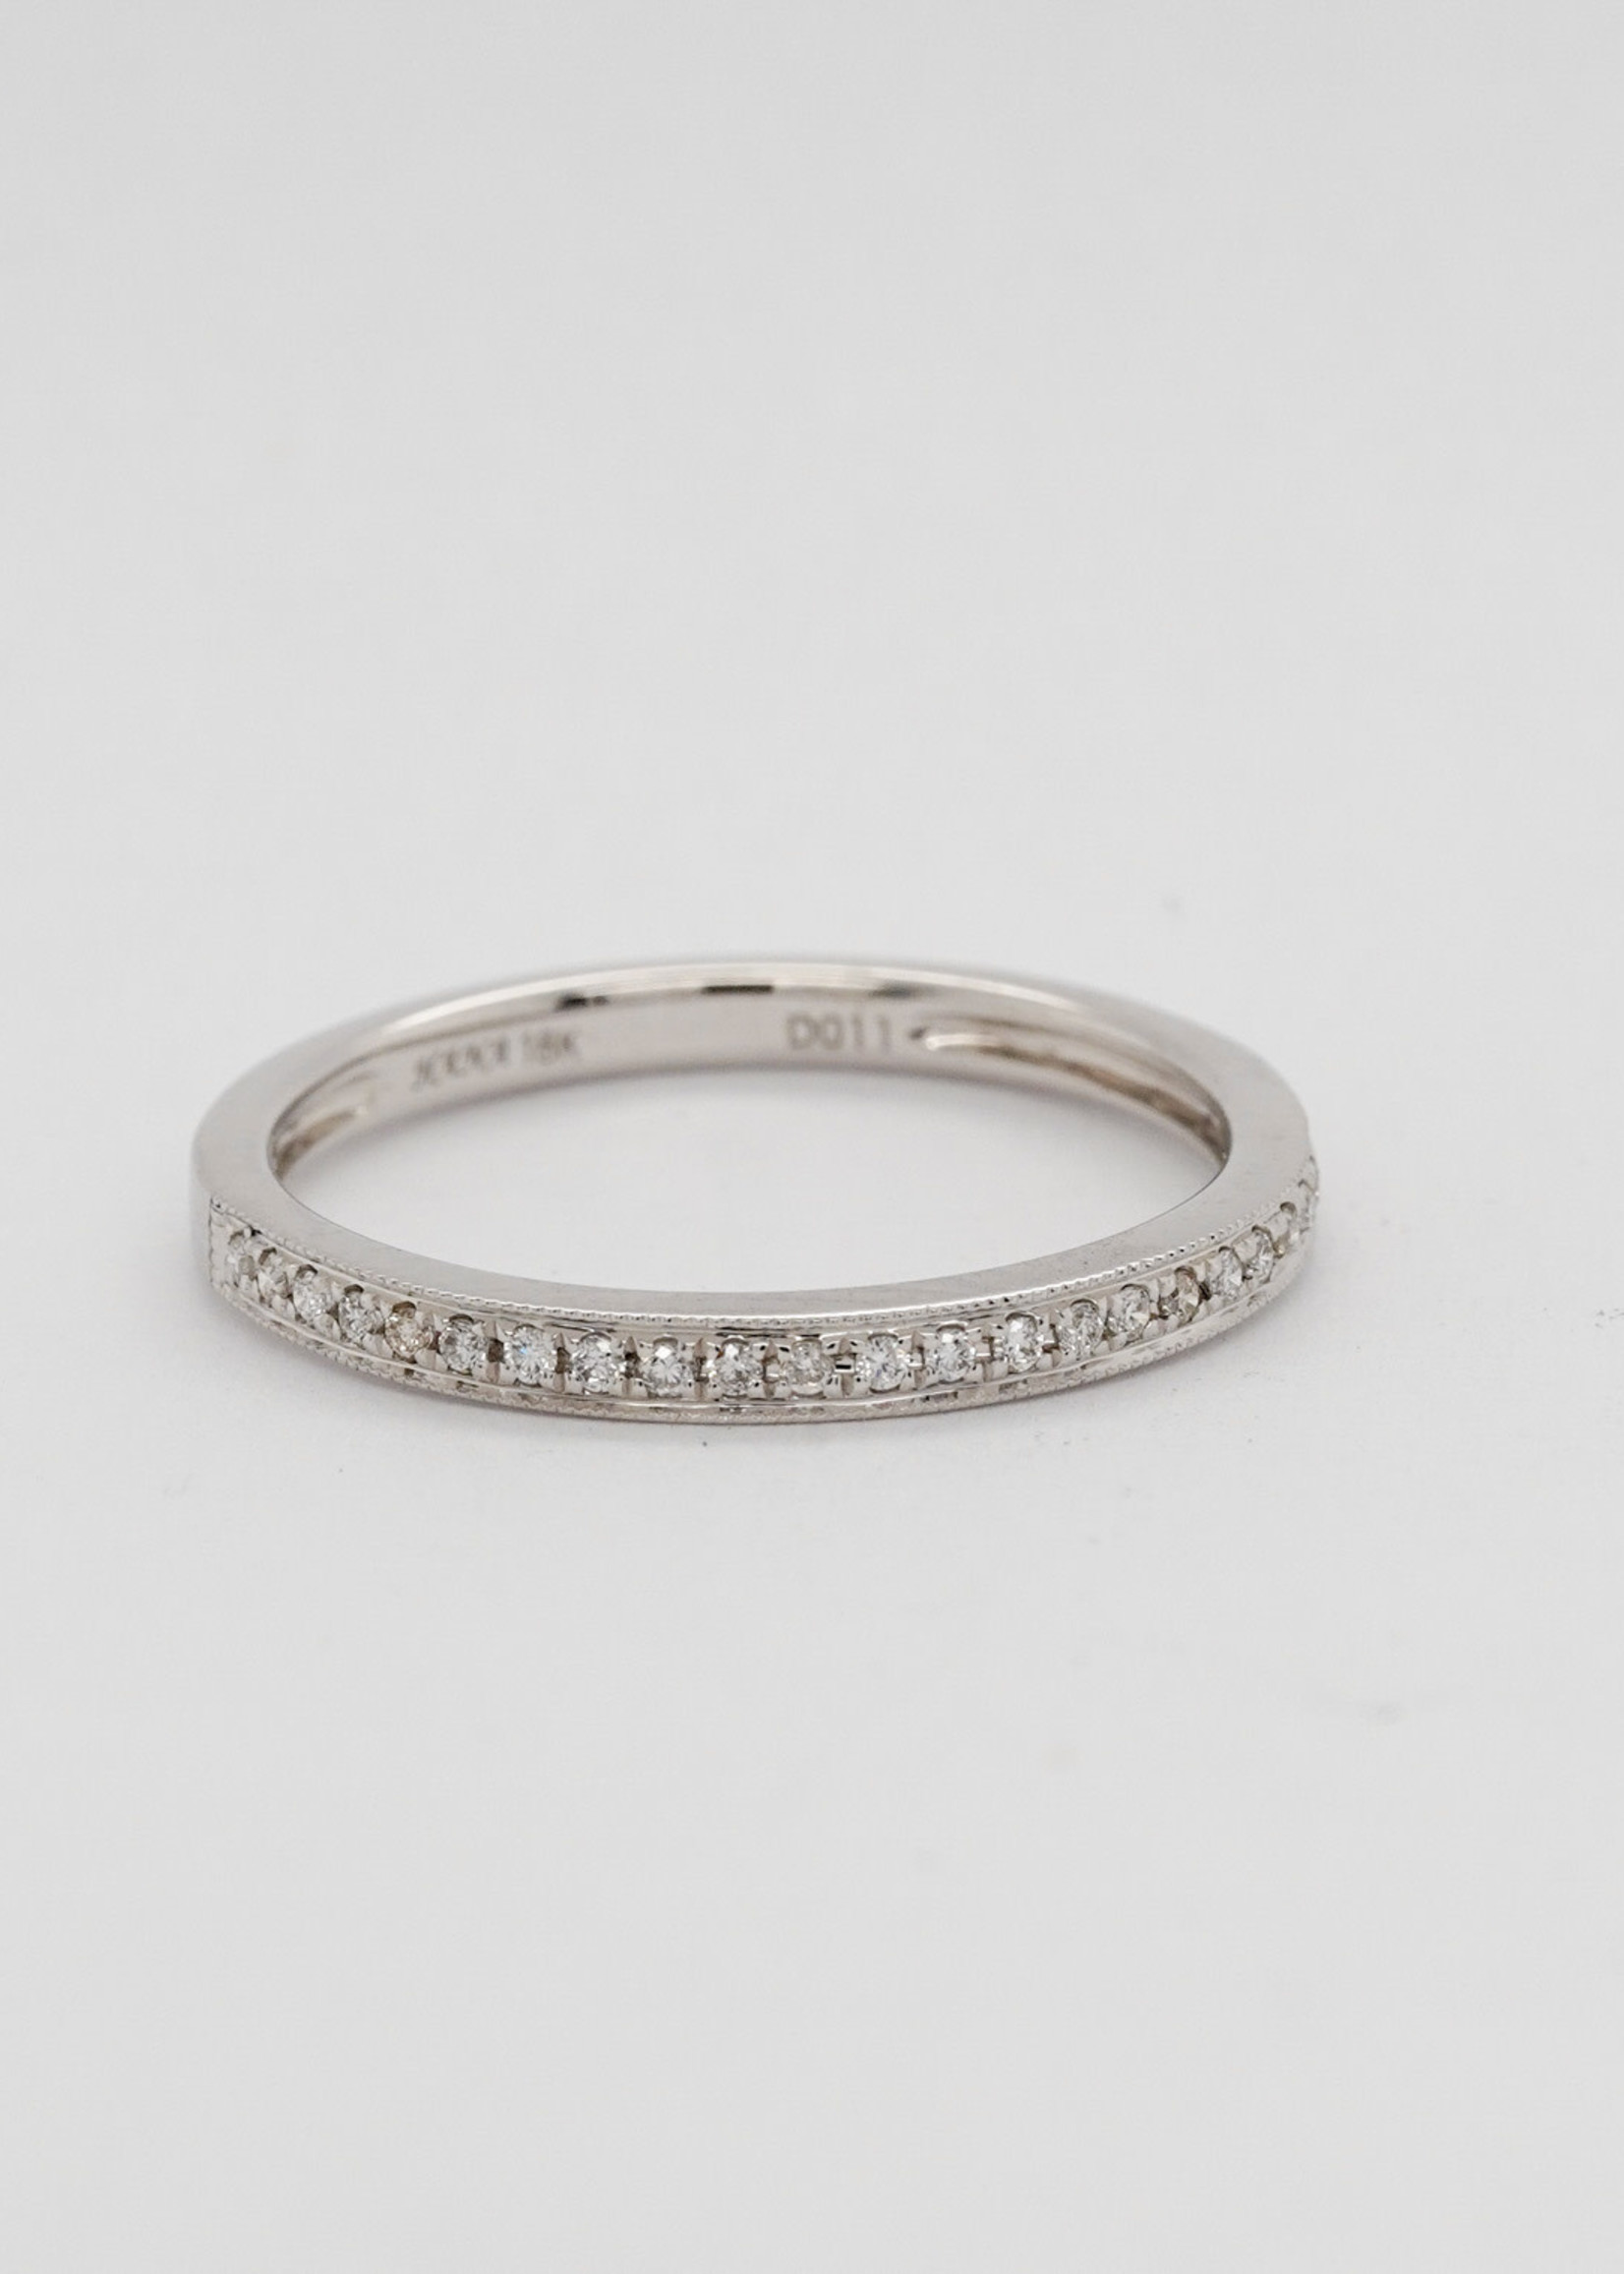 18KW 1.92g .11g Diamond Stackable Band (size 6.5)